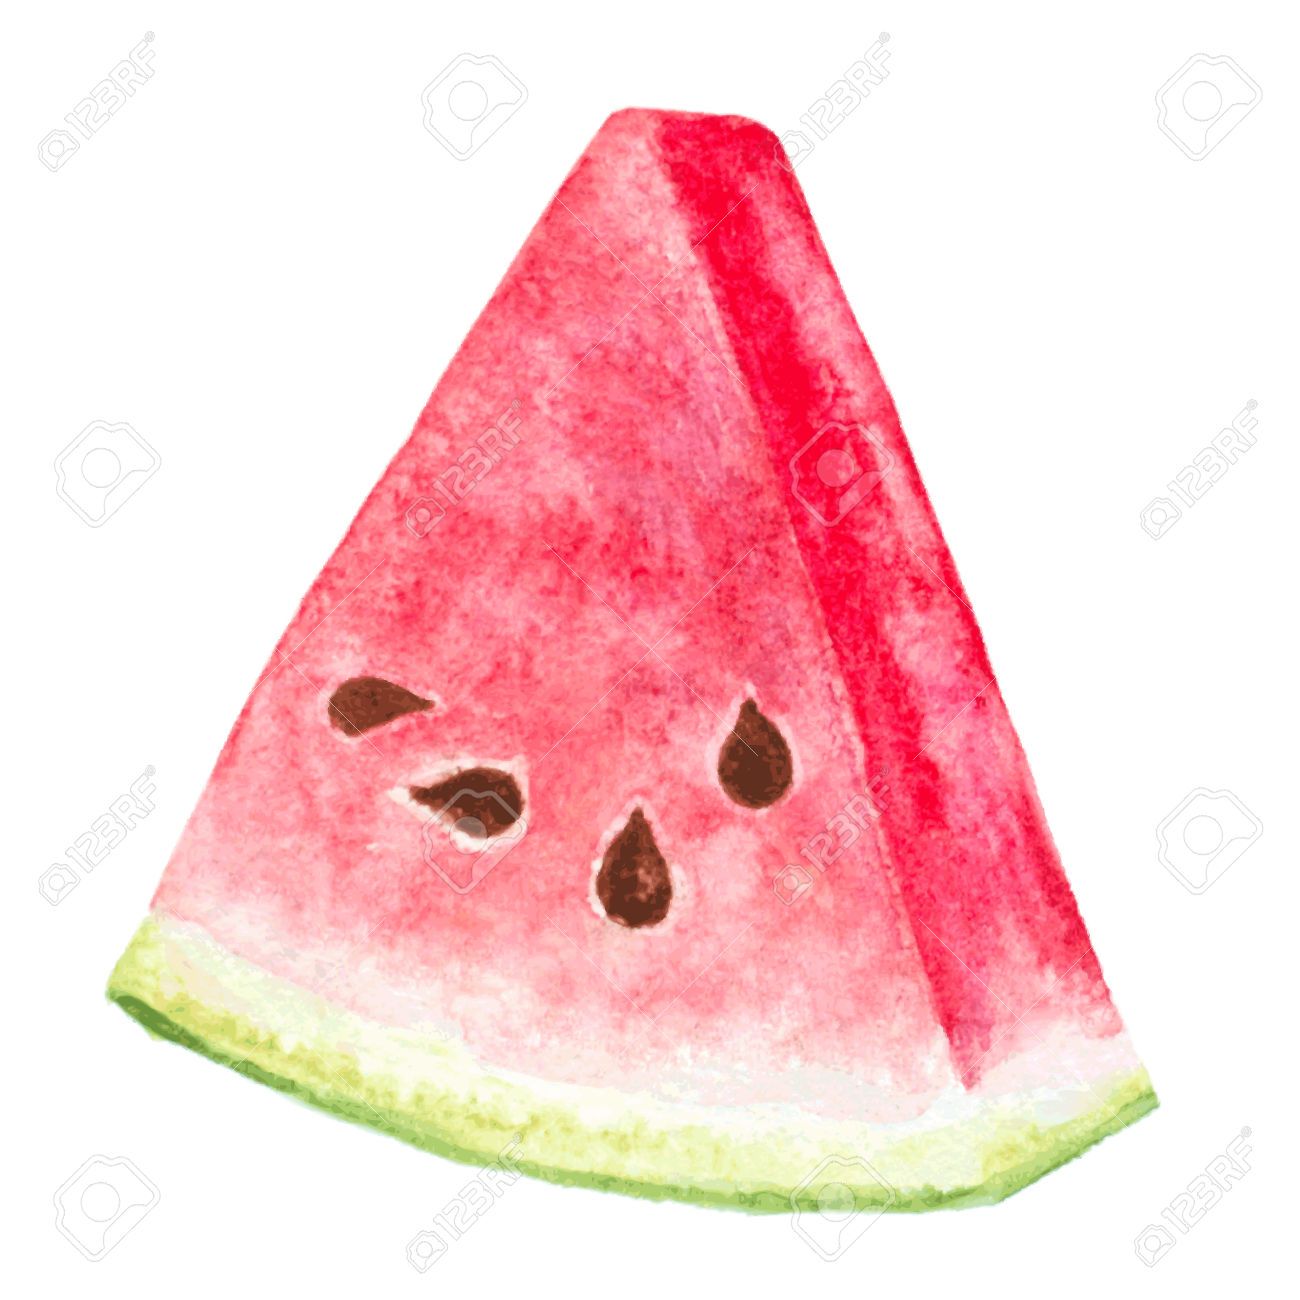 Watercolor Hand Drawn Watermelon Piece On White Royalty Free